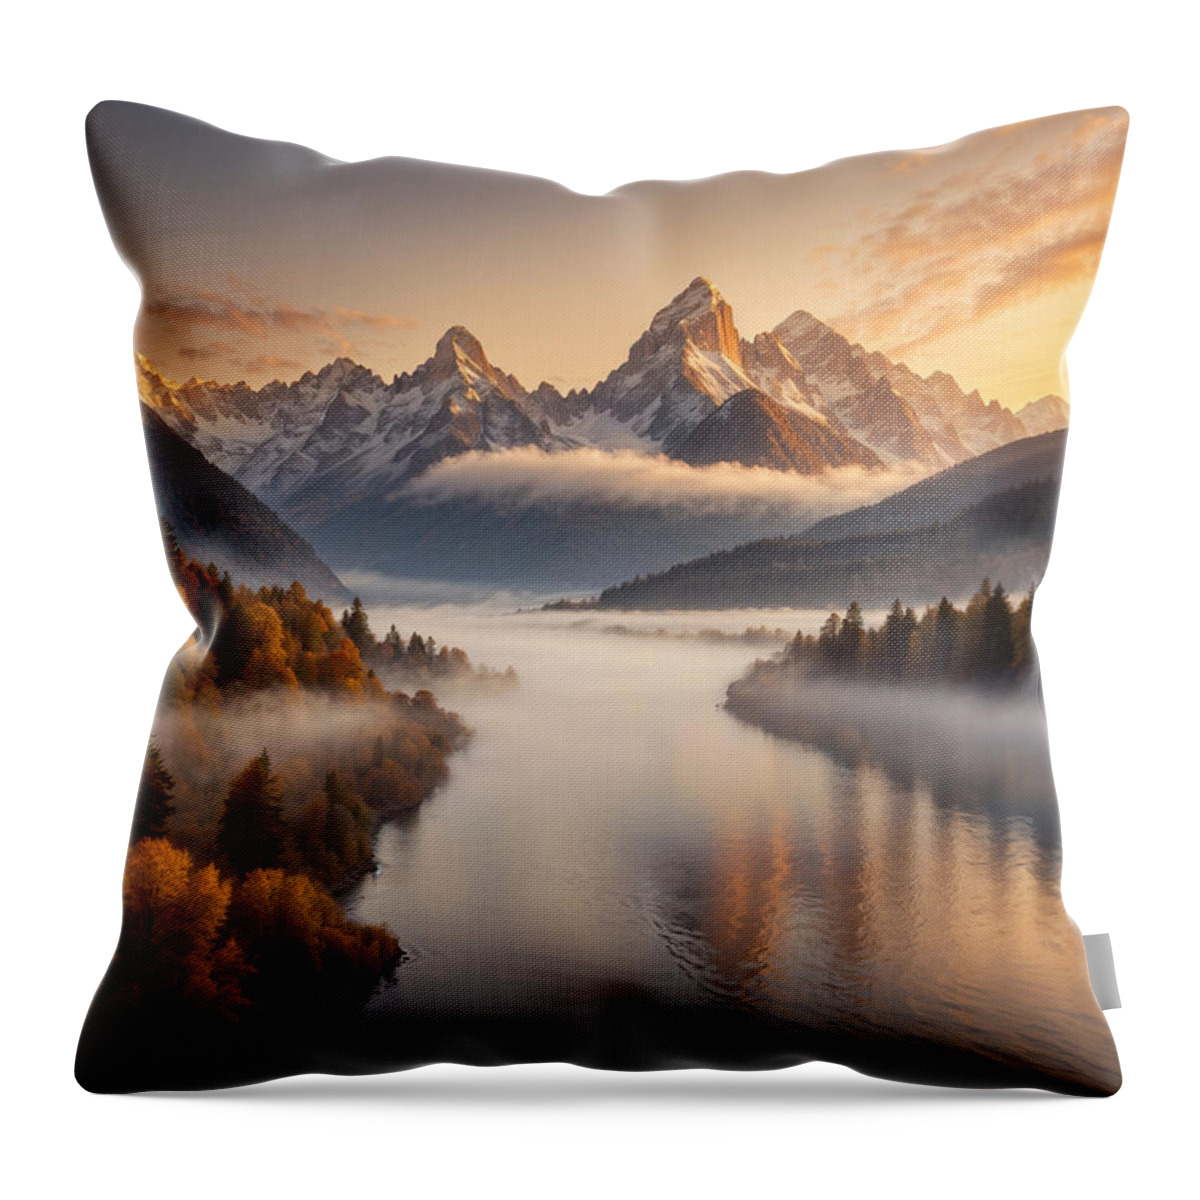 Mountains Throw Pillow featuring the digital art Mountain Sunrise by Mark Greenberg